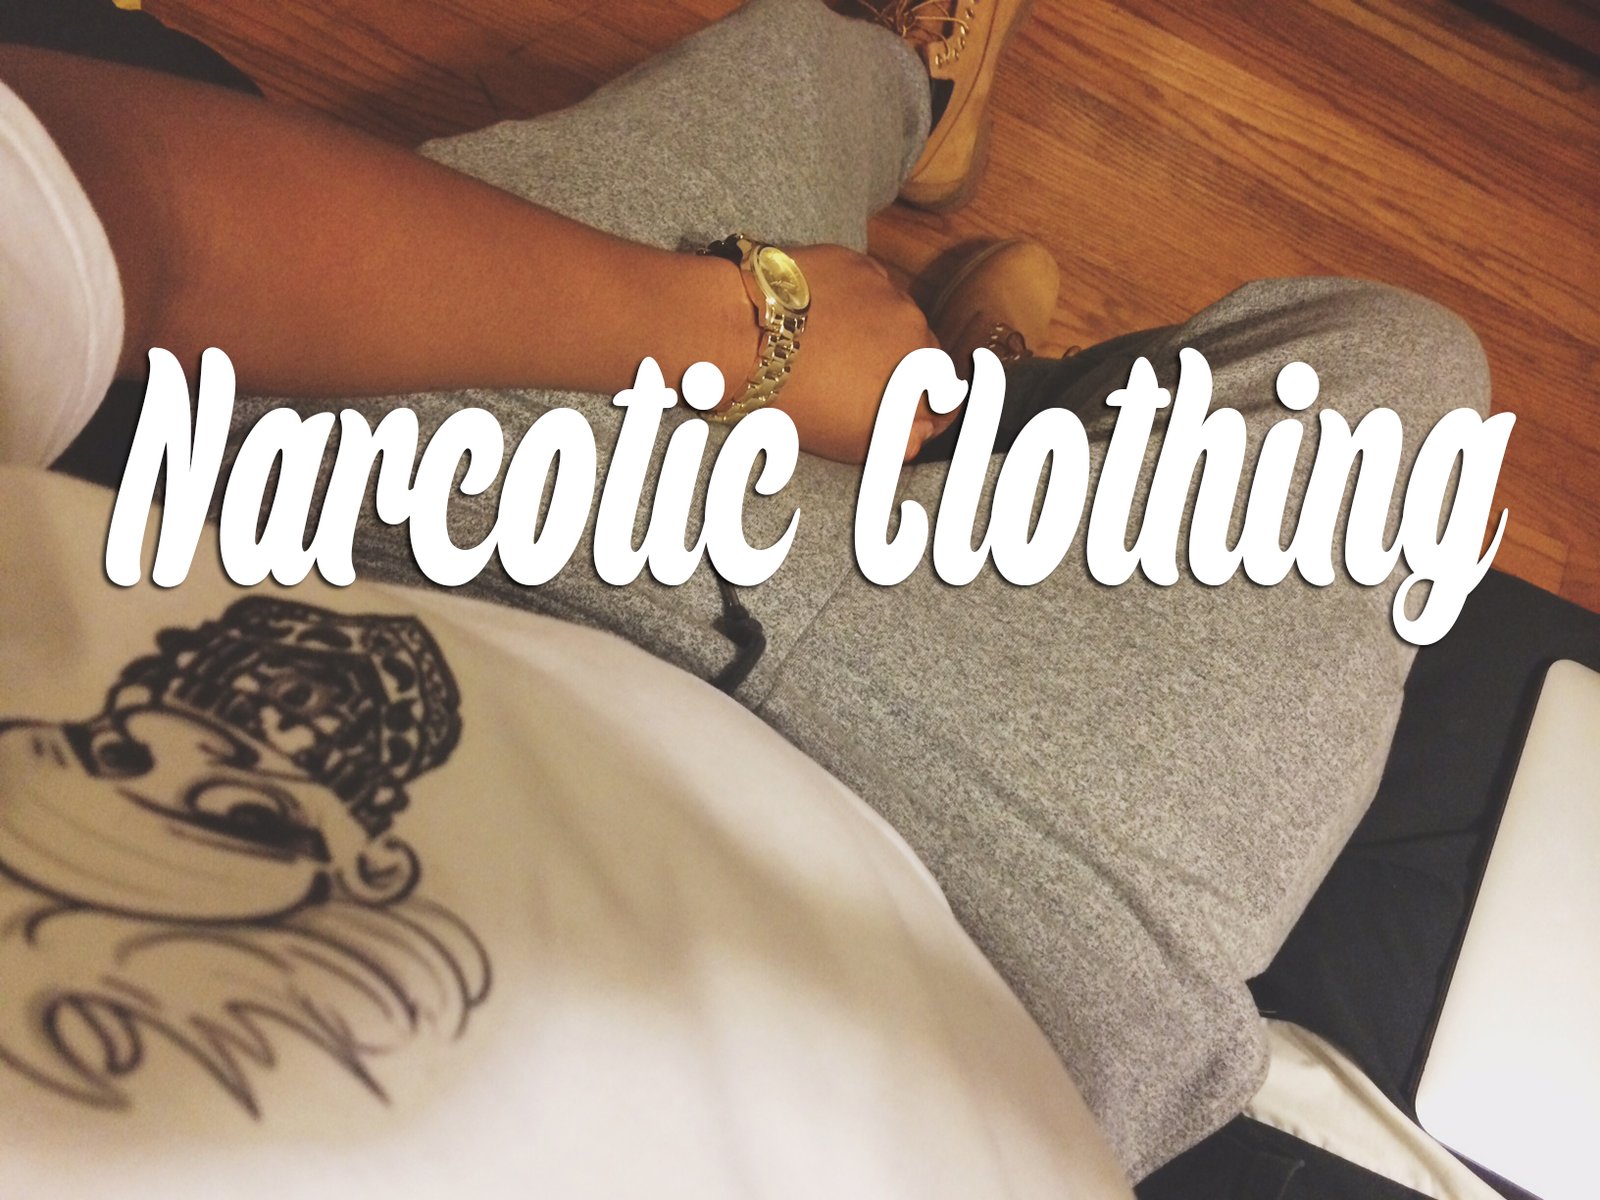 Narcotic Clothing